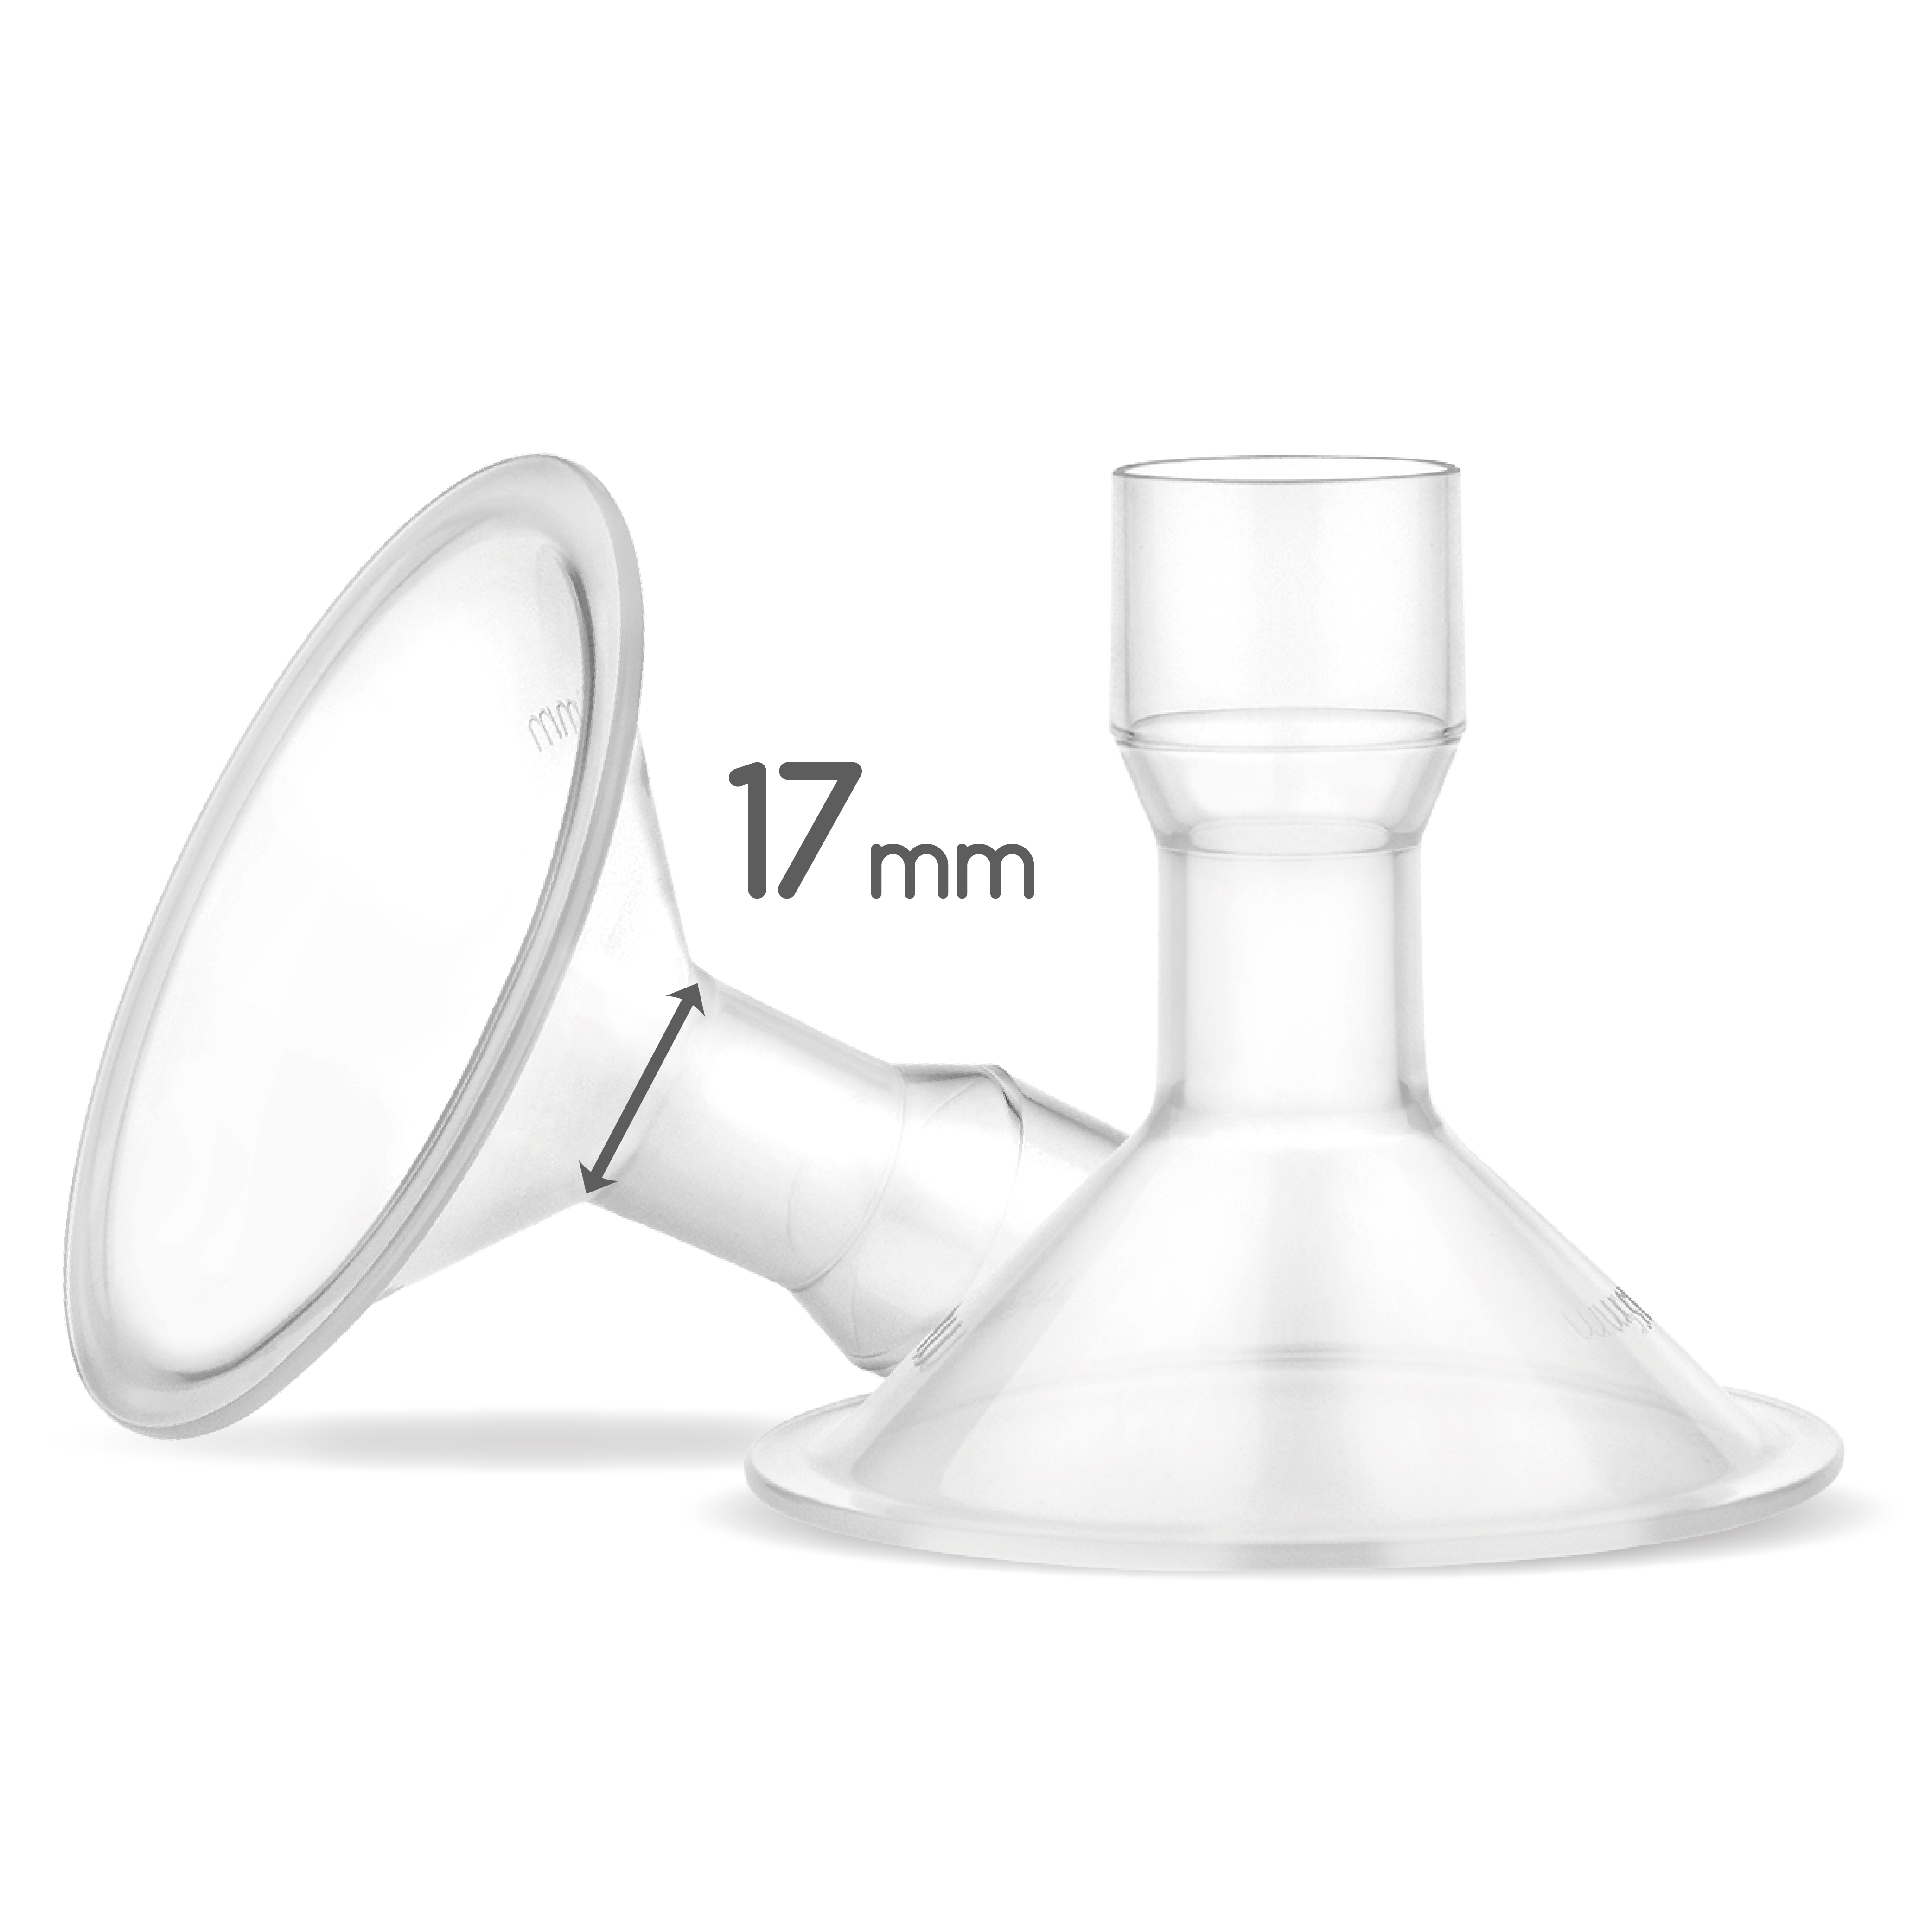 MyFit 17 mm Shield; Compatible with Medela Breast Pumps Having PersonalFit, Freestyle, Harmony, Maxi Connector; Connects; 2pc